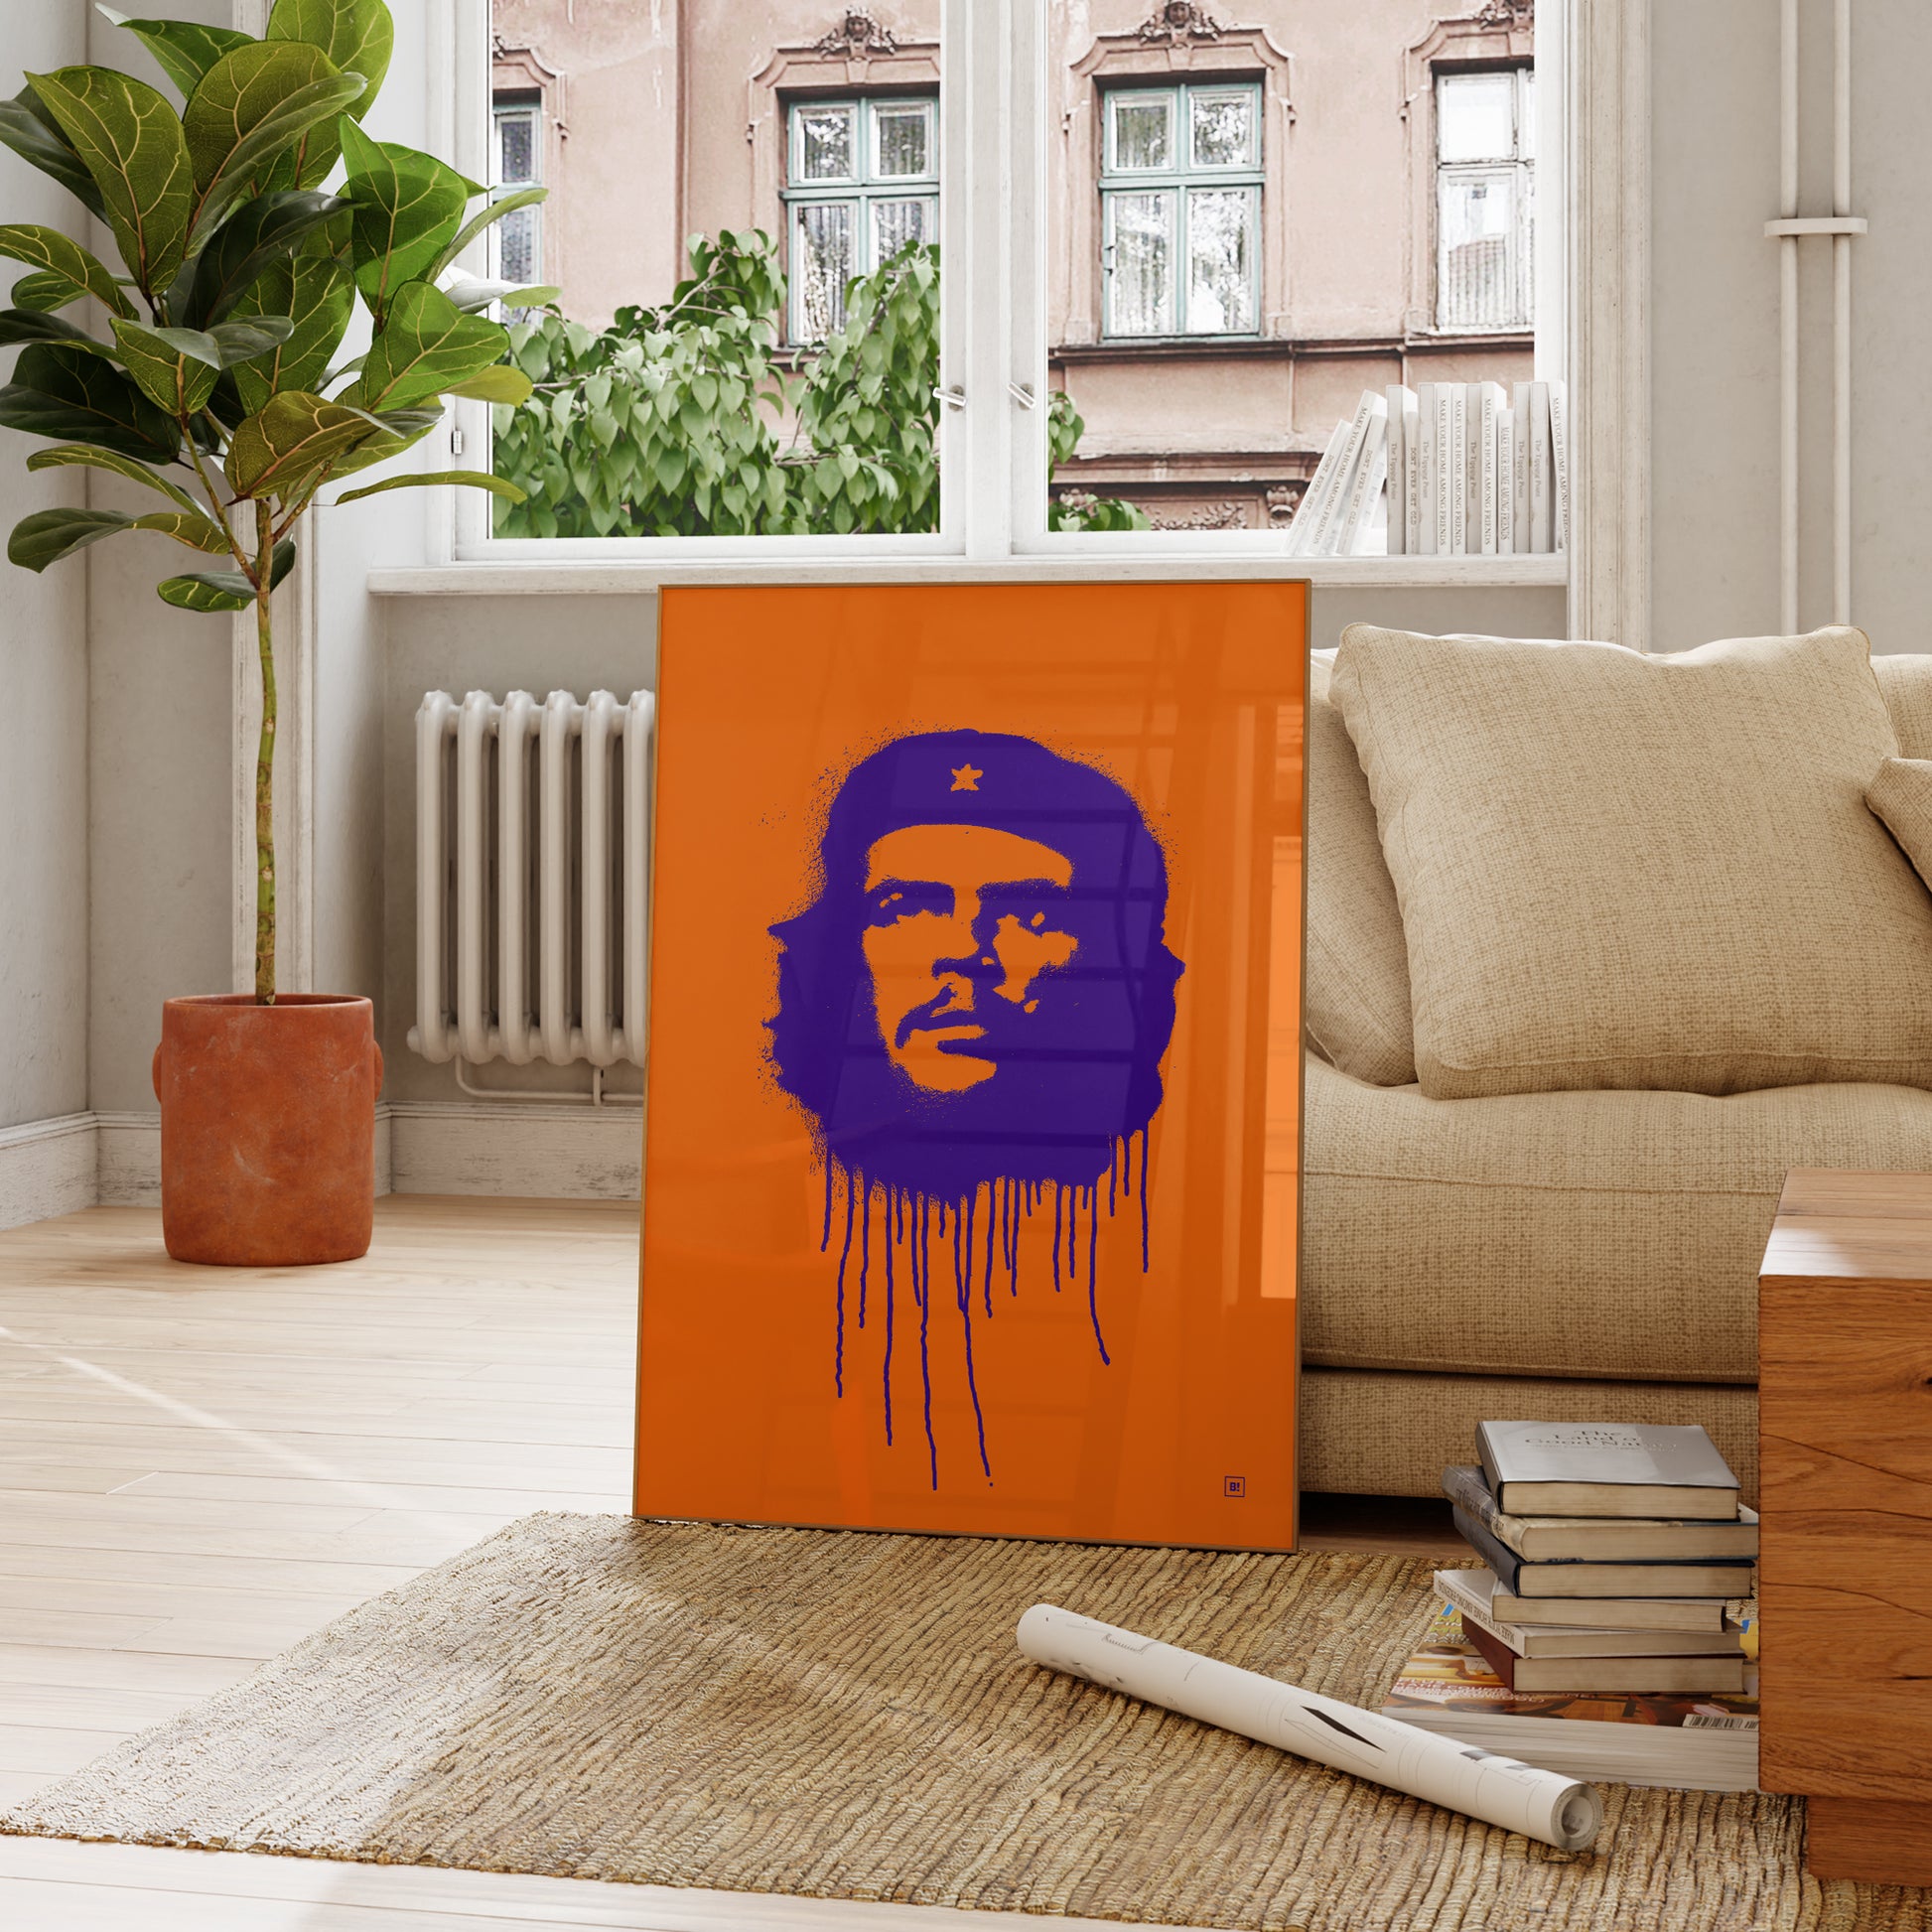 Be inspired by our pop navy "Ernesto Che Guevara" art print! This artwork was printed using the giclée process on archival acid-free paper and is presented in a French living room, capturing its timeless beauty in every detail.